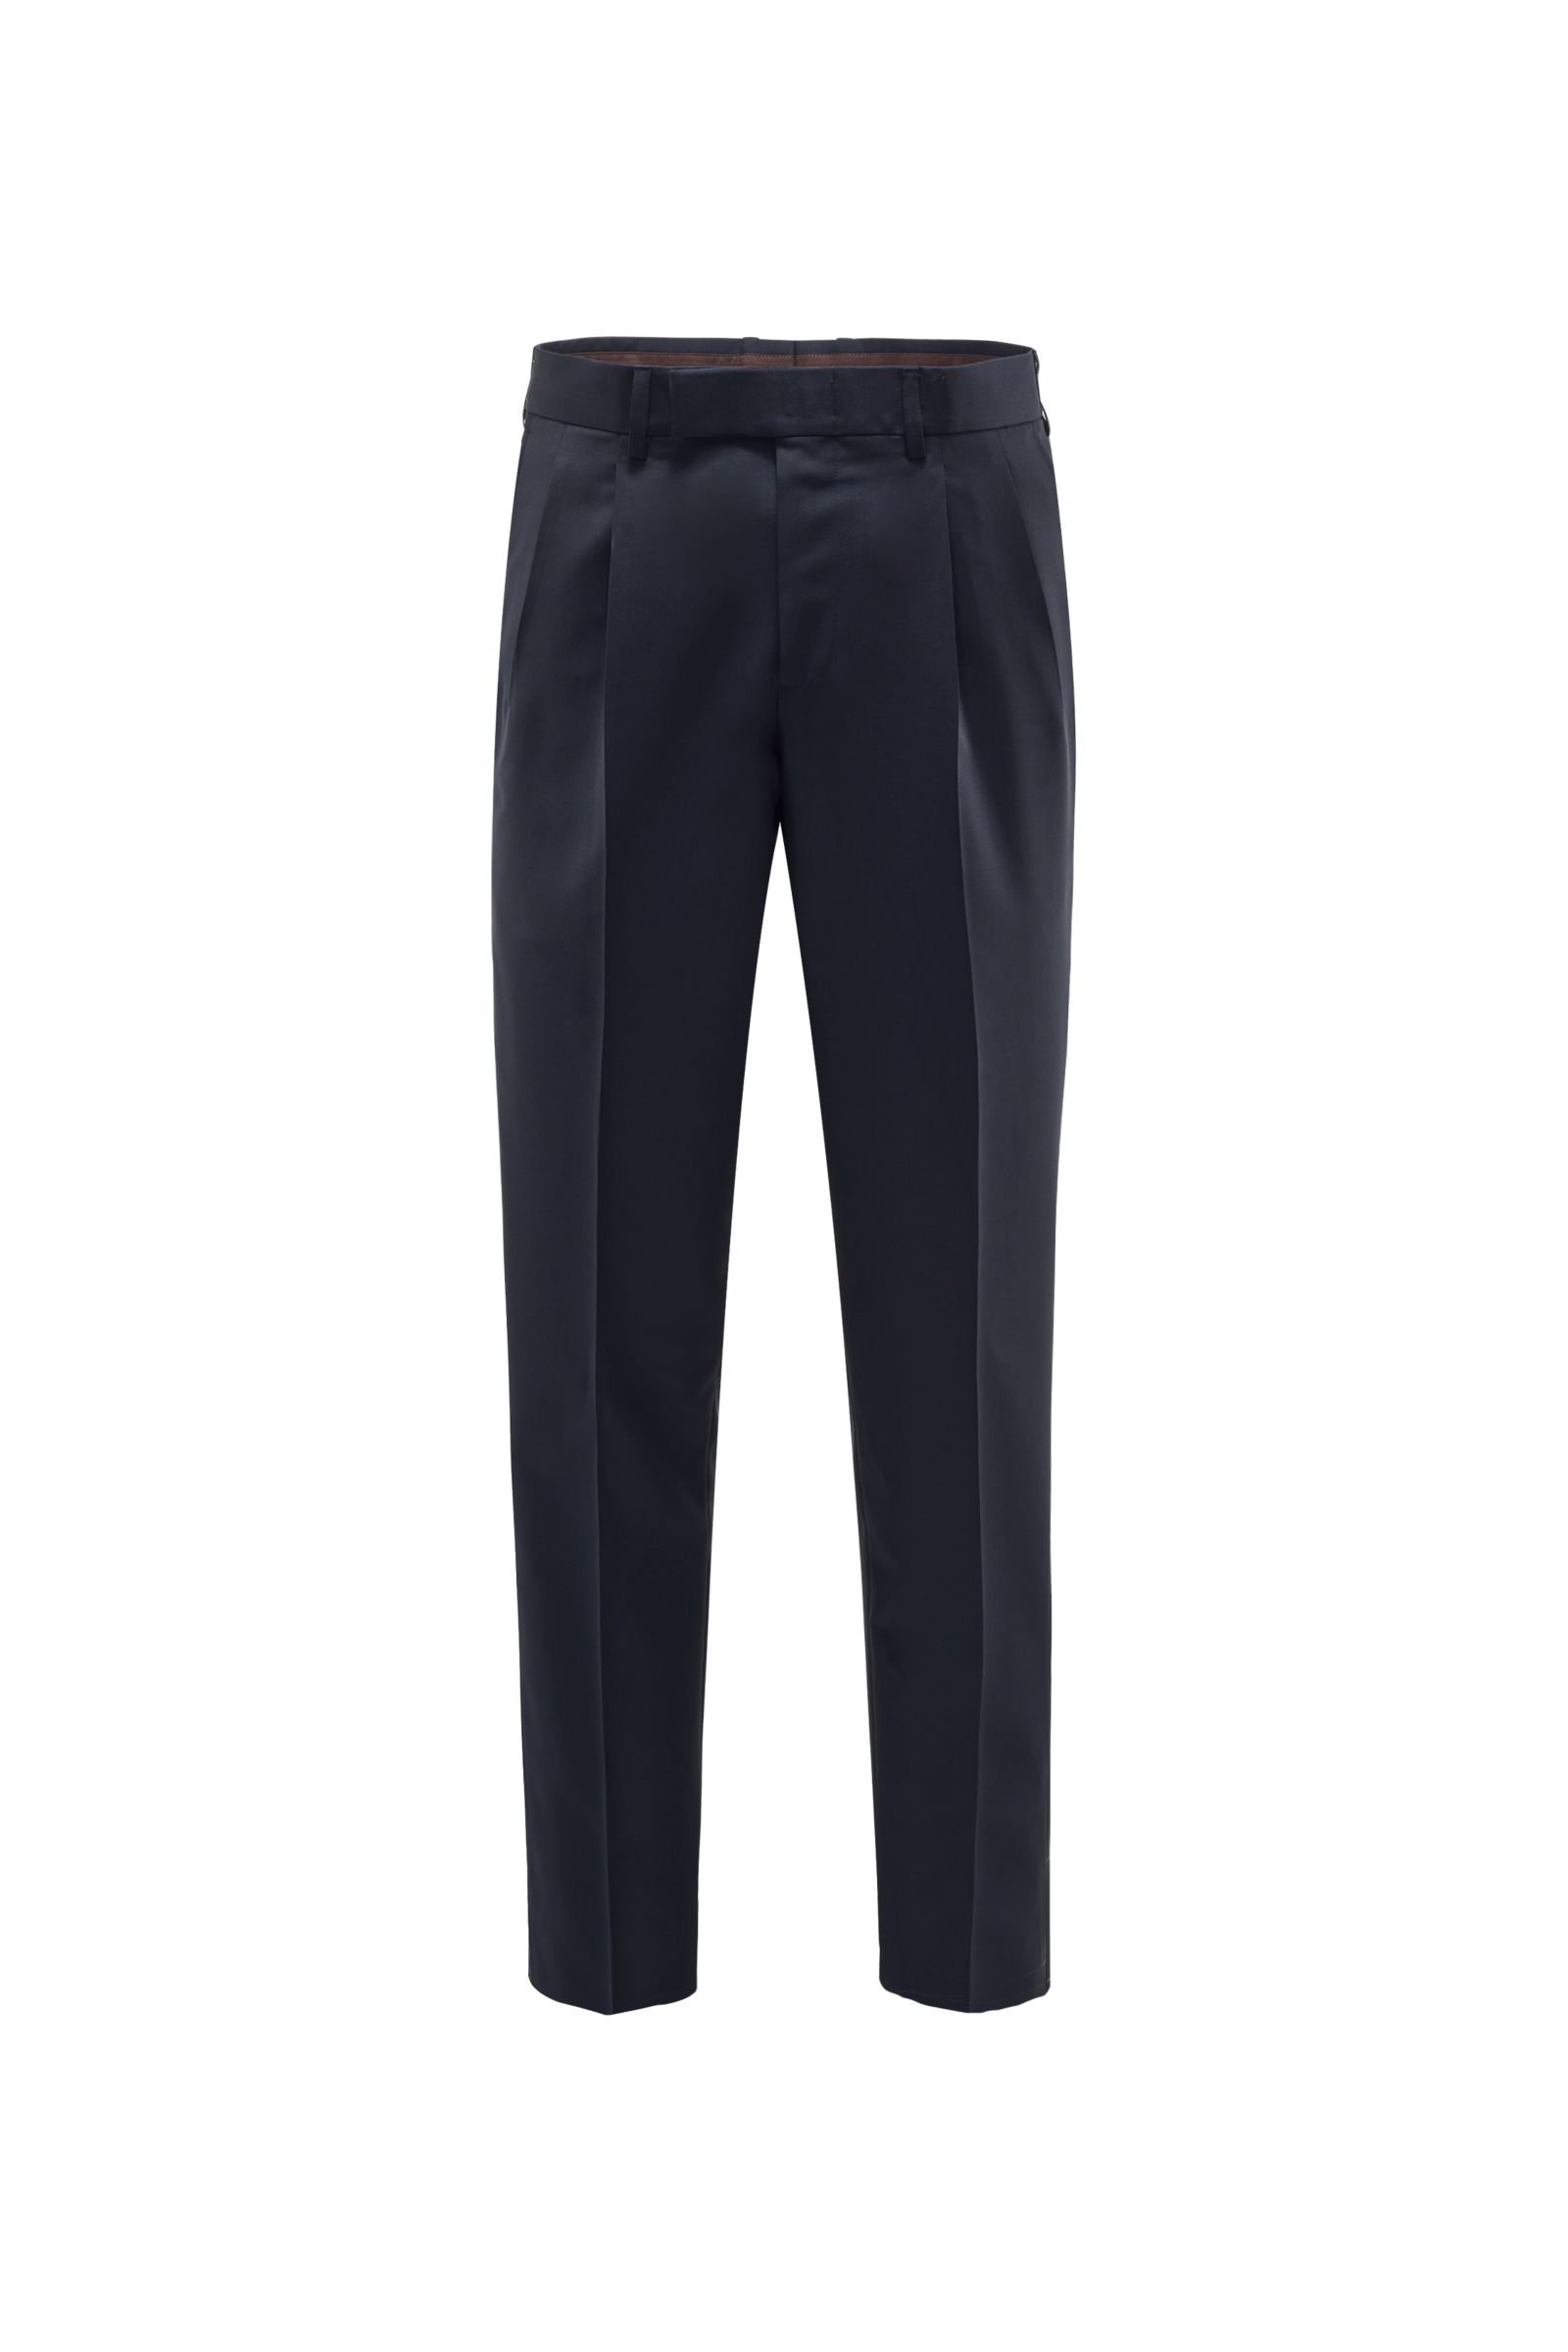 Reiss Haisley Wool Blend Tailored Trousers Navy at John Lewis  Partners